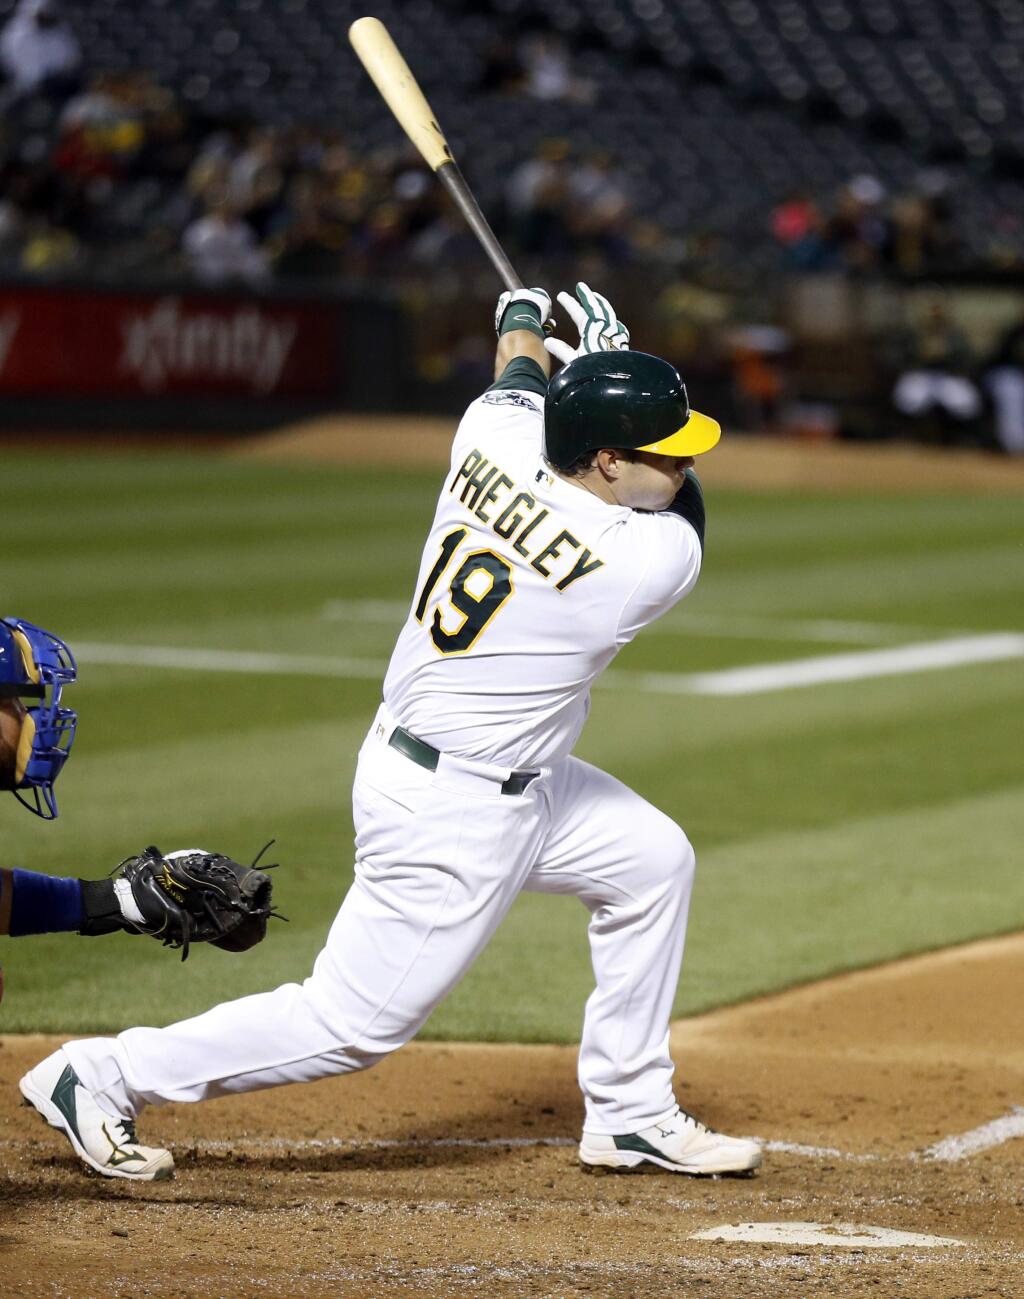 Oakland Athletics' Josh Phegley follows through on a three-run home run against the Texas Rangers during the fourth inning of a baseball game Monday, June 13, 2016, in Oakland, Calif. (AP Photo/D. Ross Cameron)